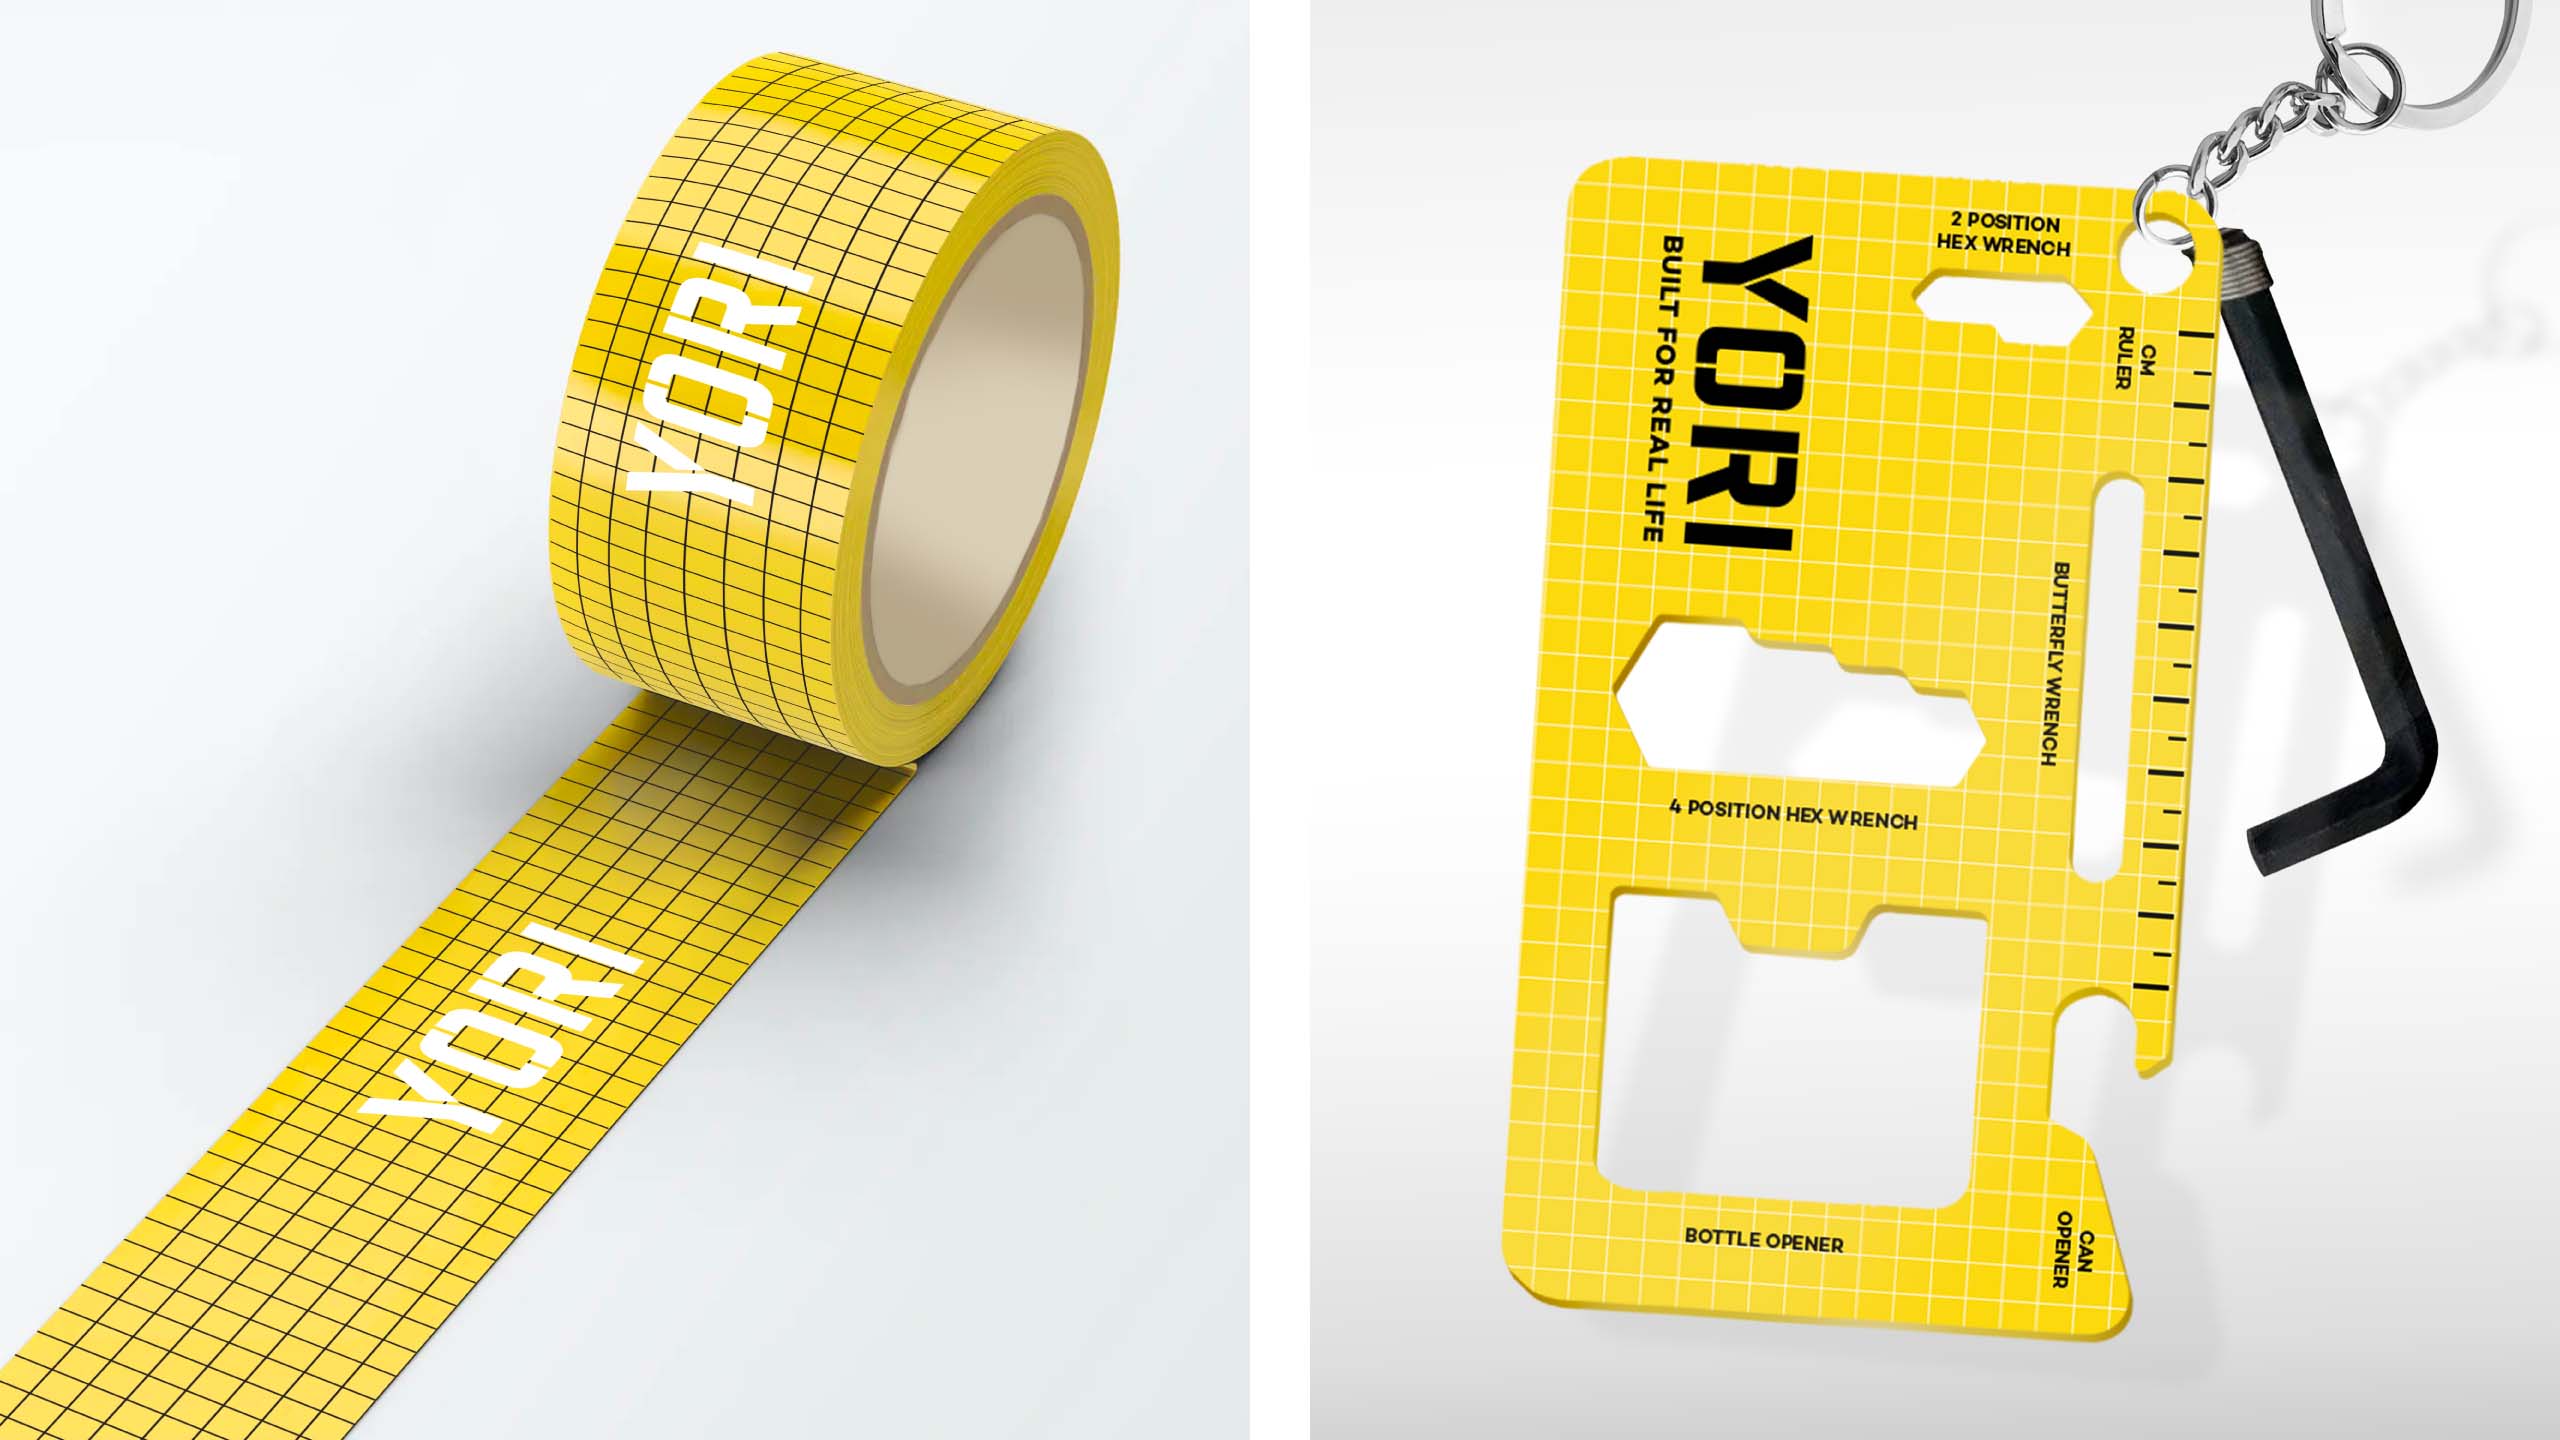 Furniture brand Yori's fun pattern applied to packaging tape and its toolbox inspired keychain